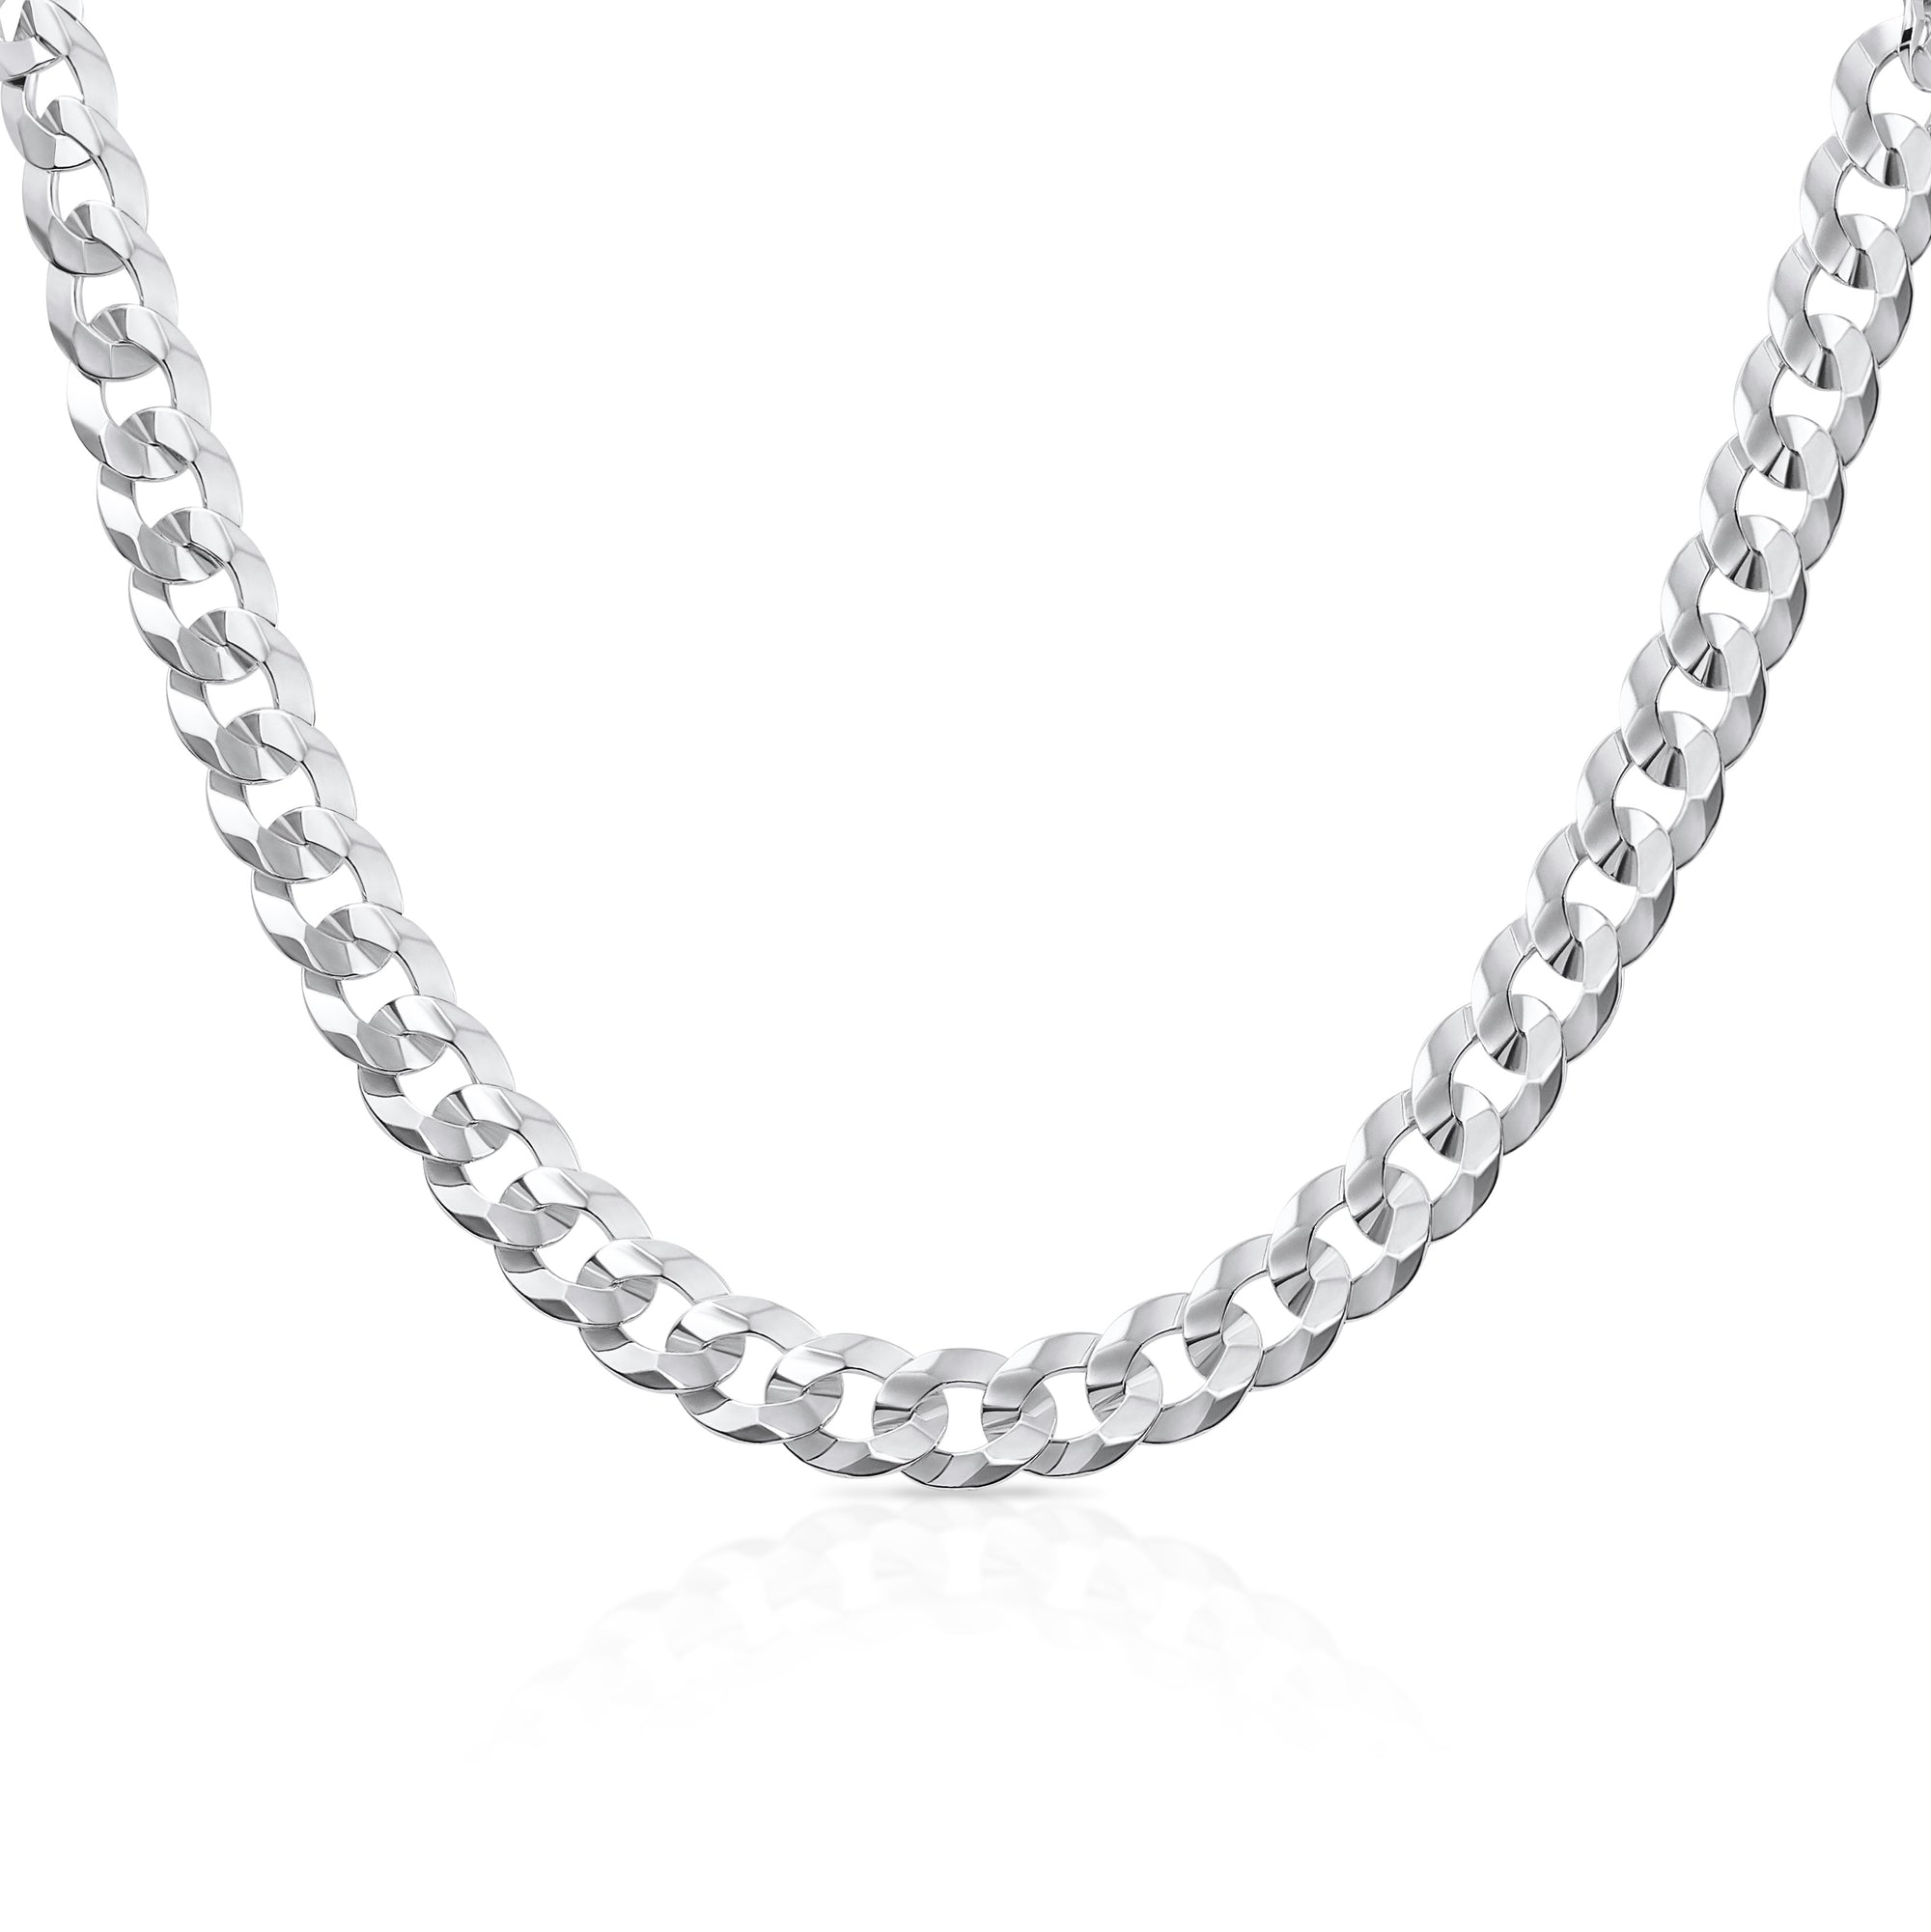 Curb Link Necklace in Sterling Silver. Unisex